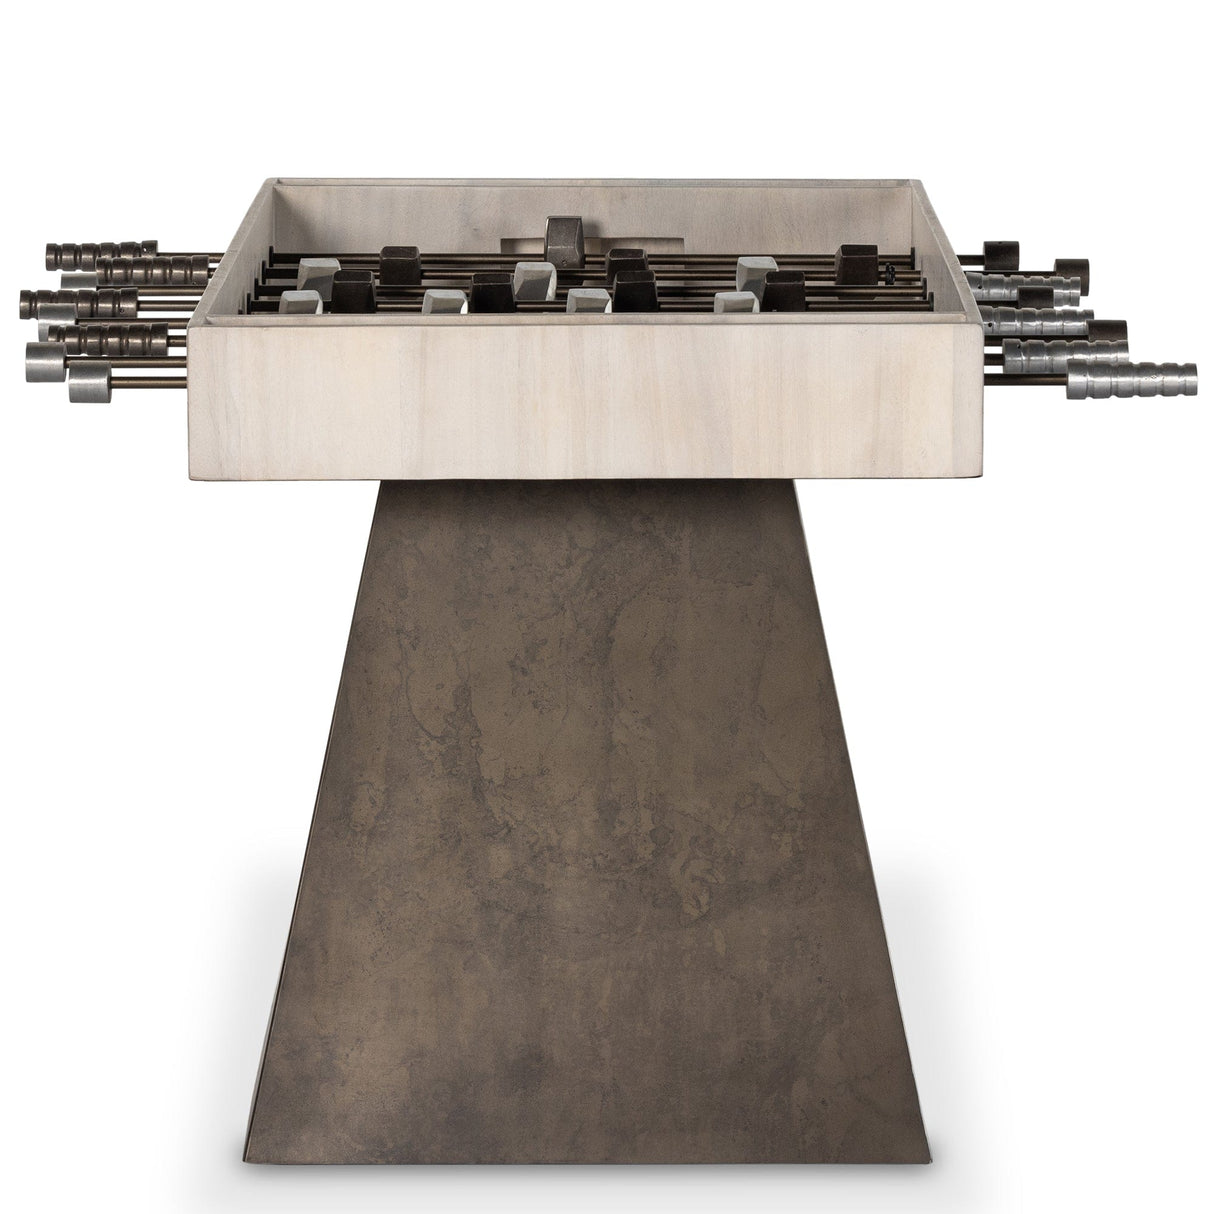 Four Hands Foosball Table Furniture